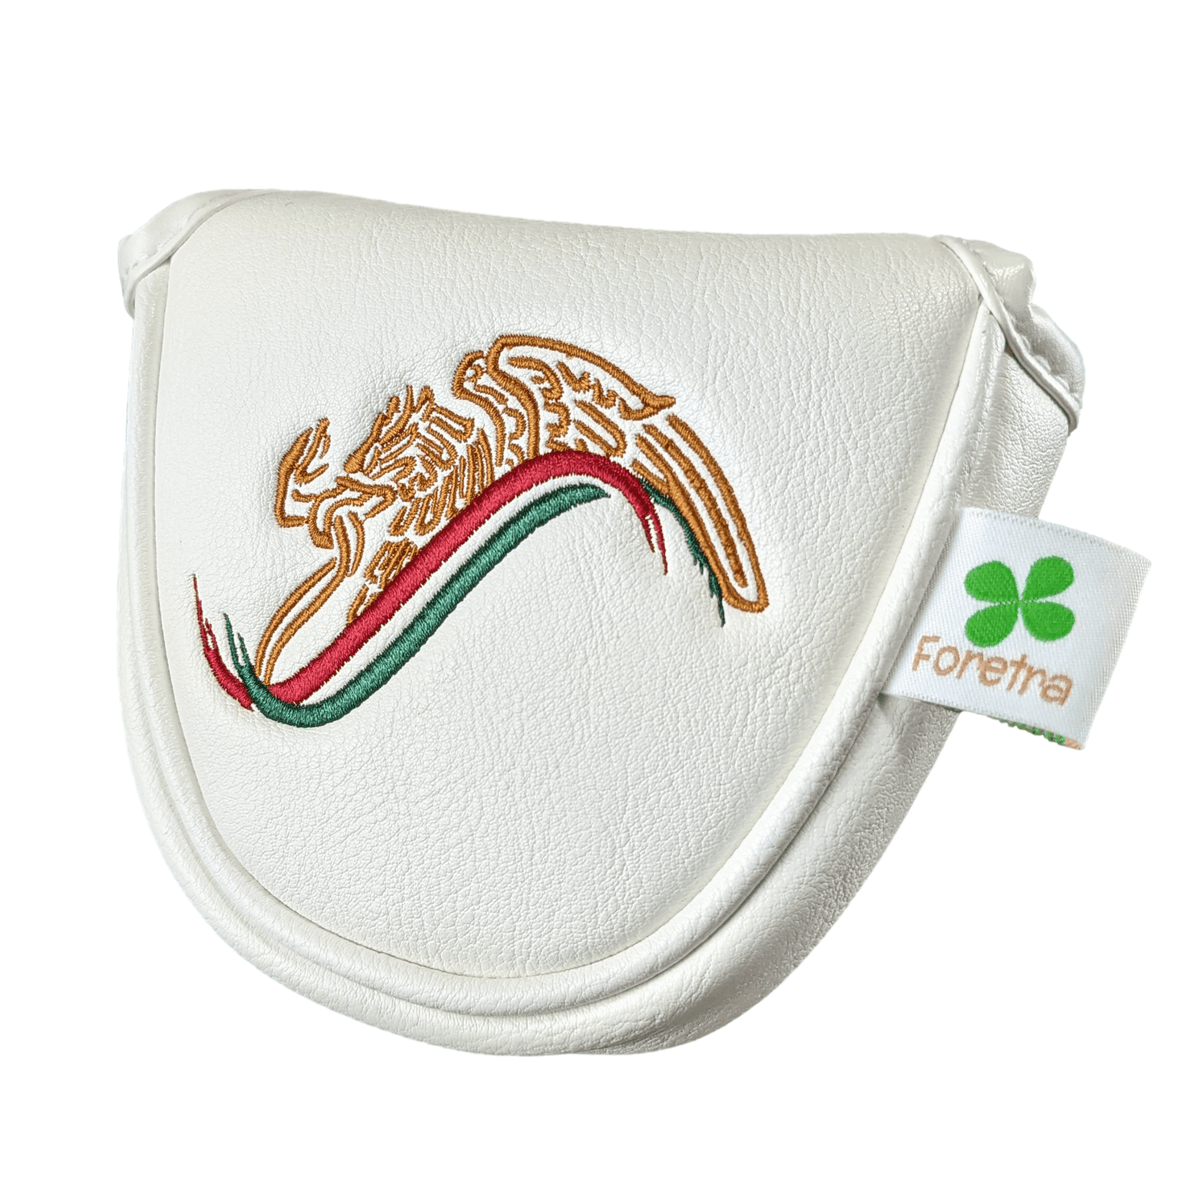 MEXICO - MALLET Putter Headcover